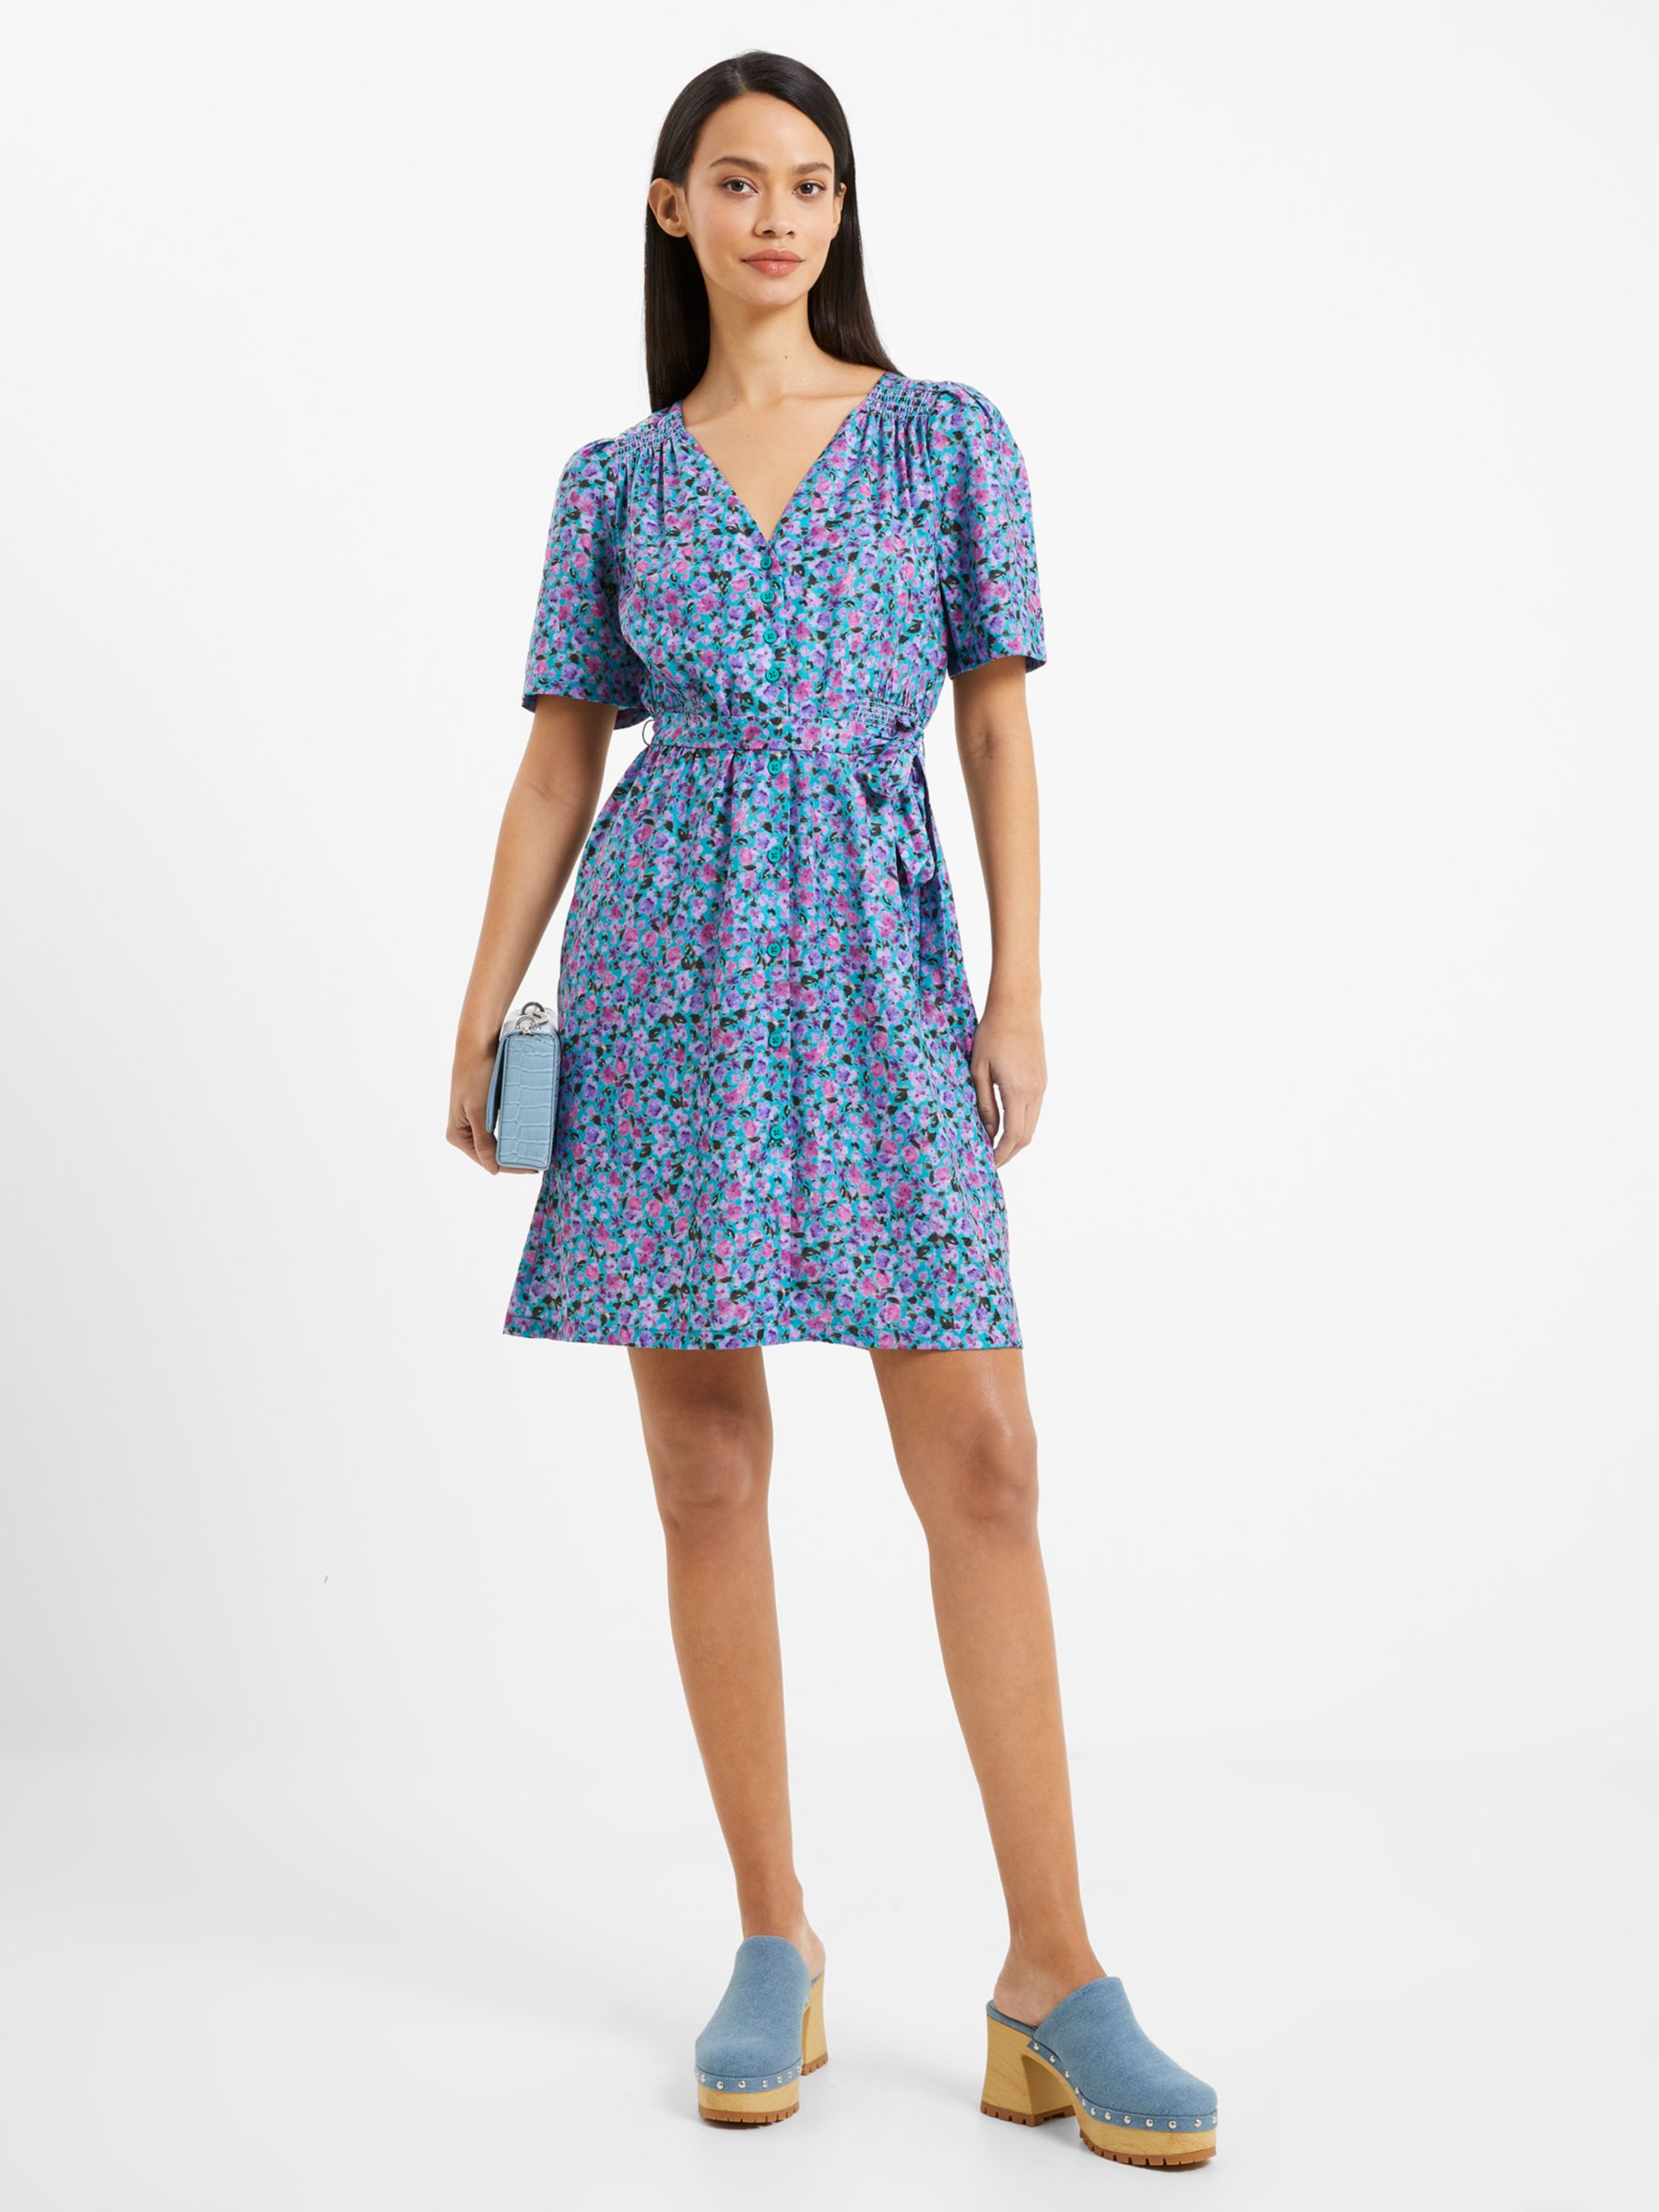 French Connection Alezzia Floral Mini Dress, Jaded Teal, 12